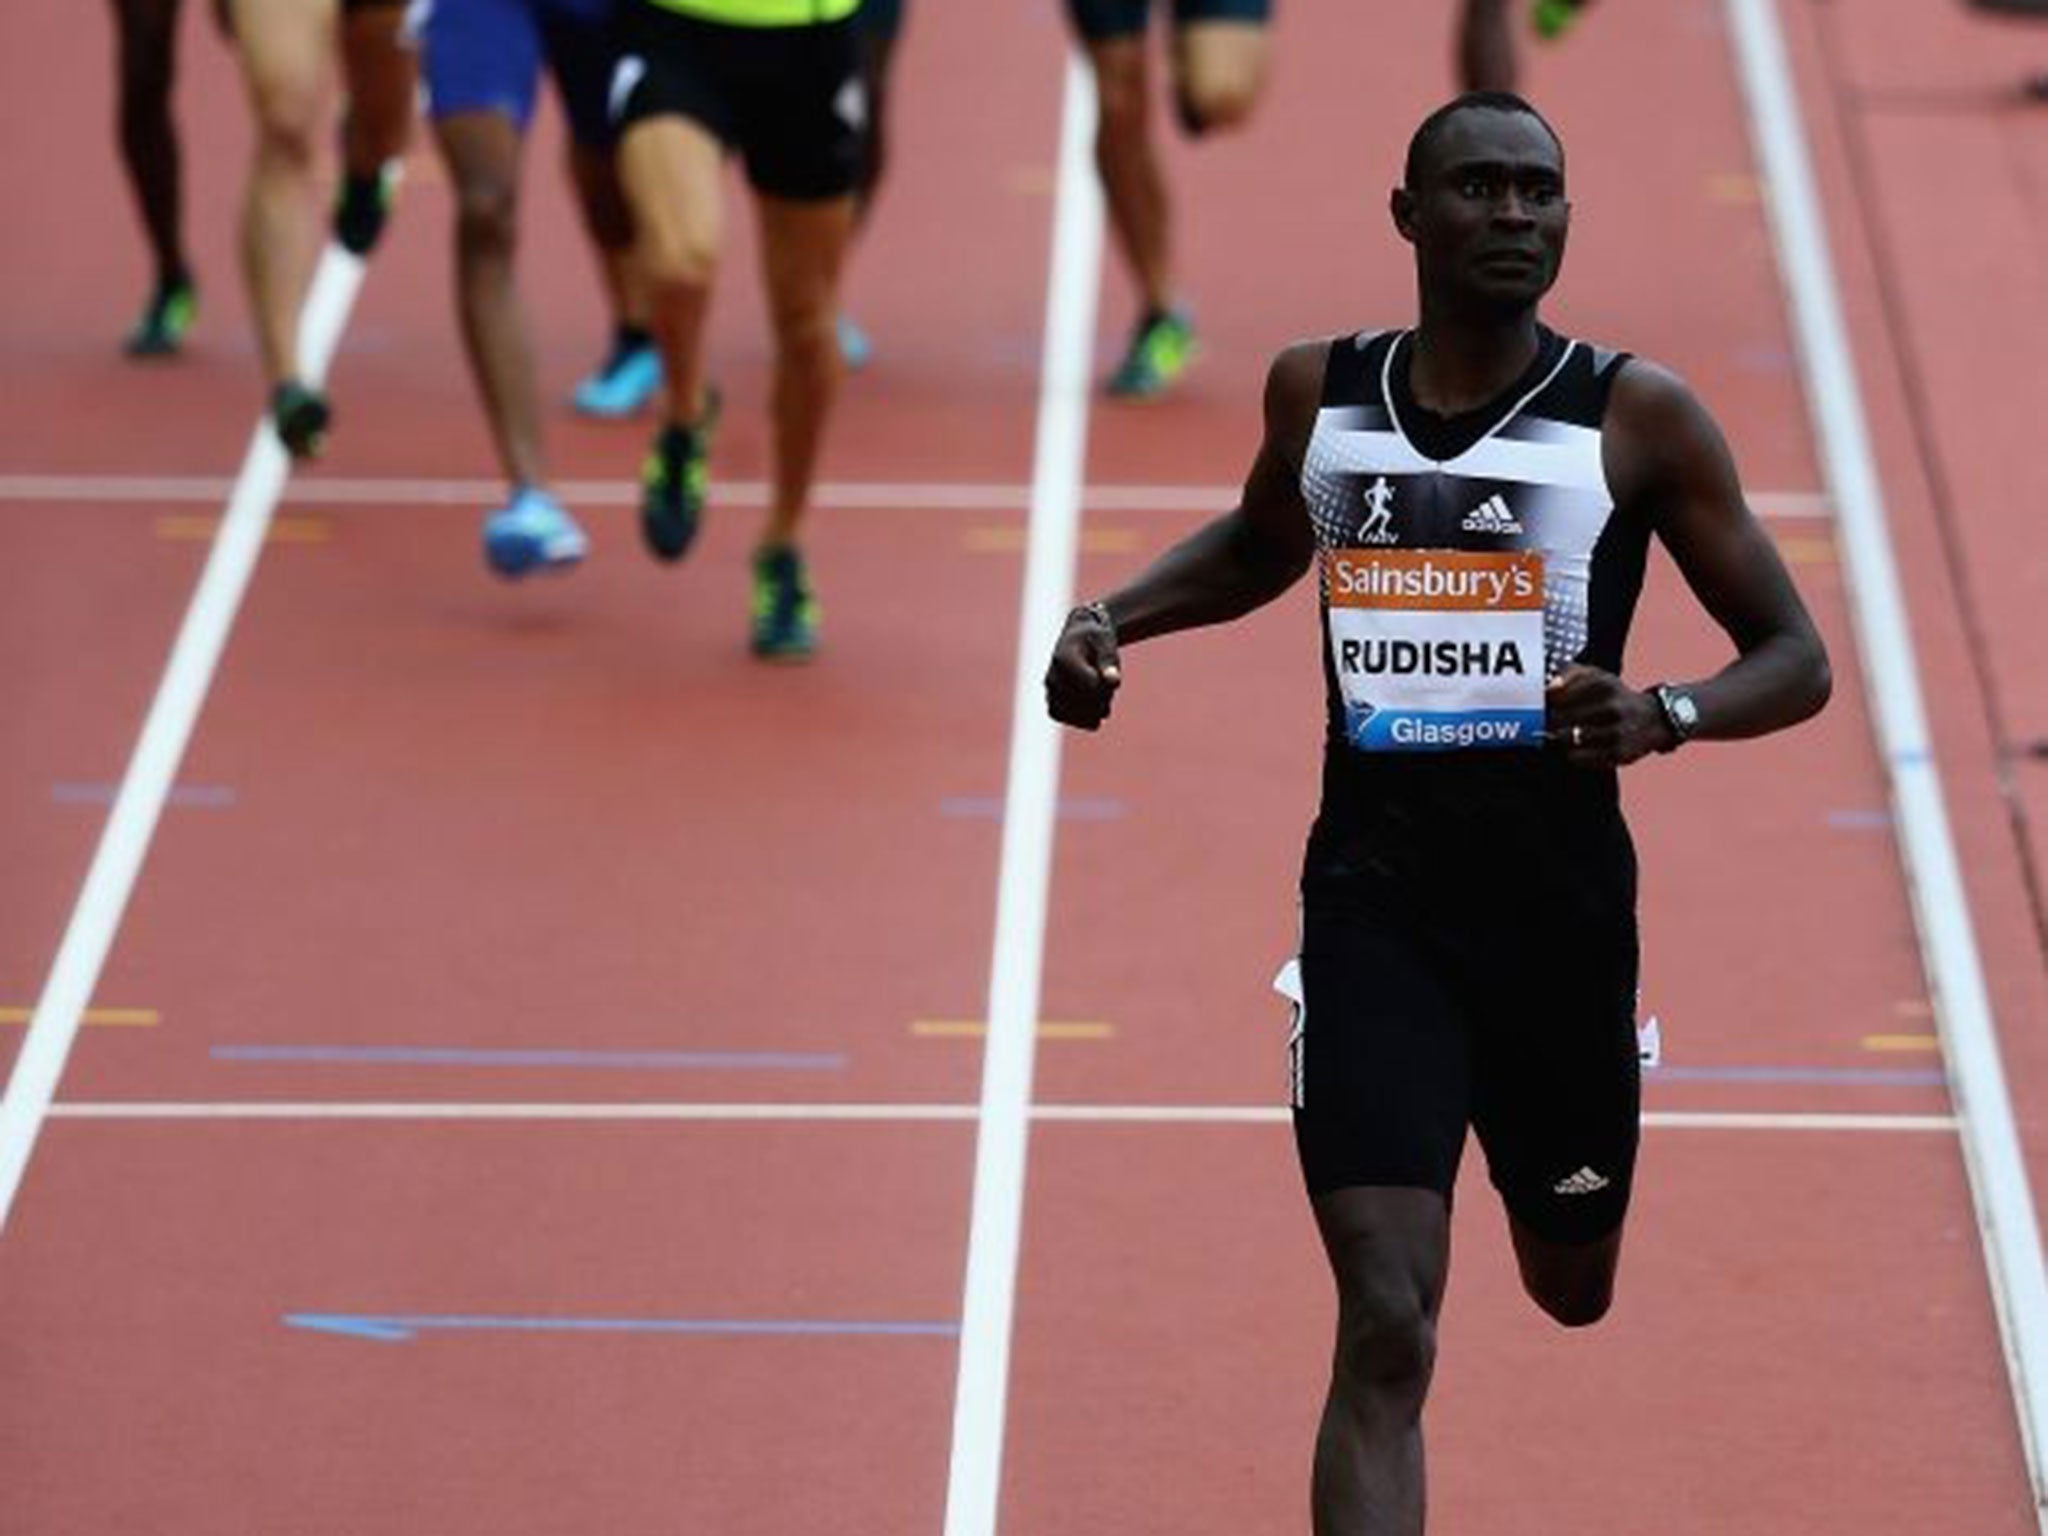 Rude awakening: After not running at all last year, David Rudisha was 2.5sec off his 2012 world record. But he still left the rest trailing in his wake